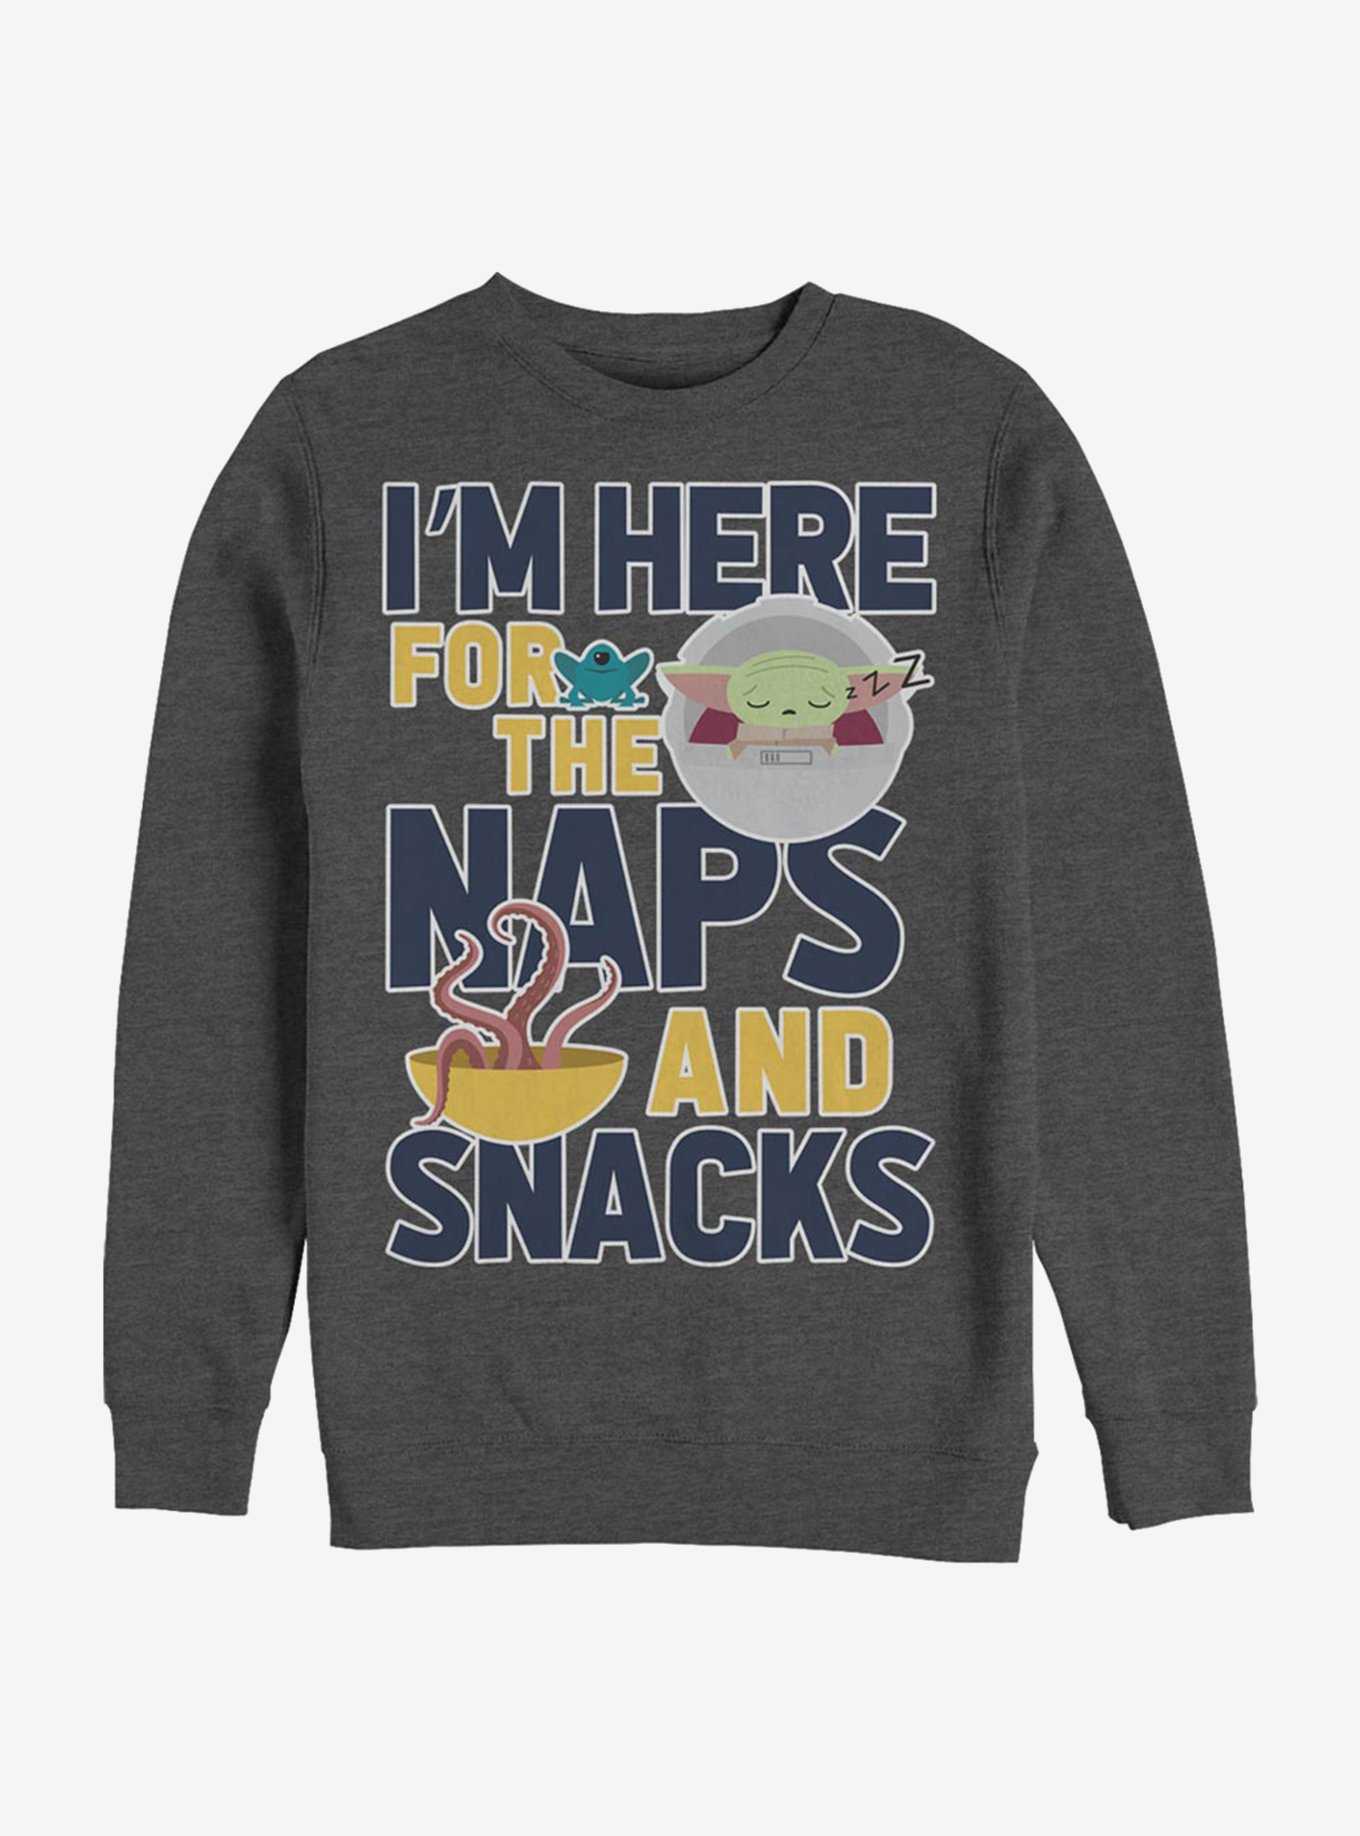 Star Wars The Mandalorian The Child Naps And Snacks Hoodie, , hi-res